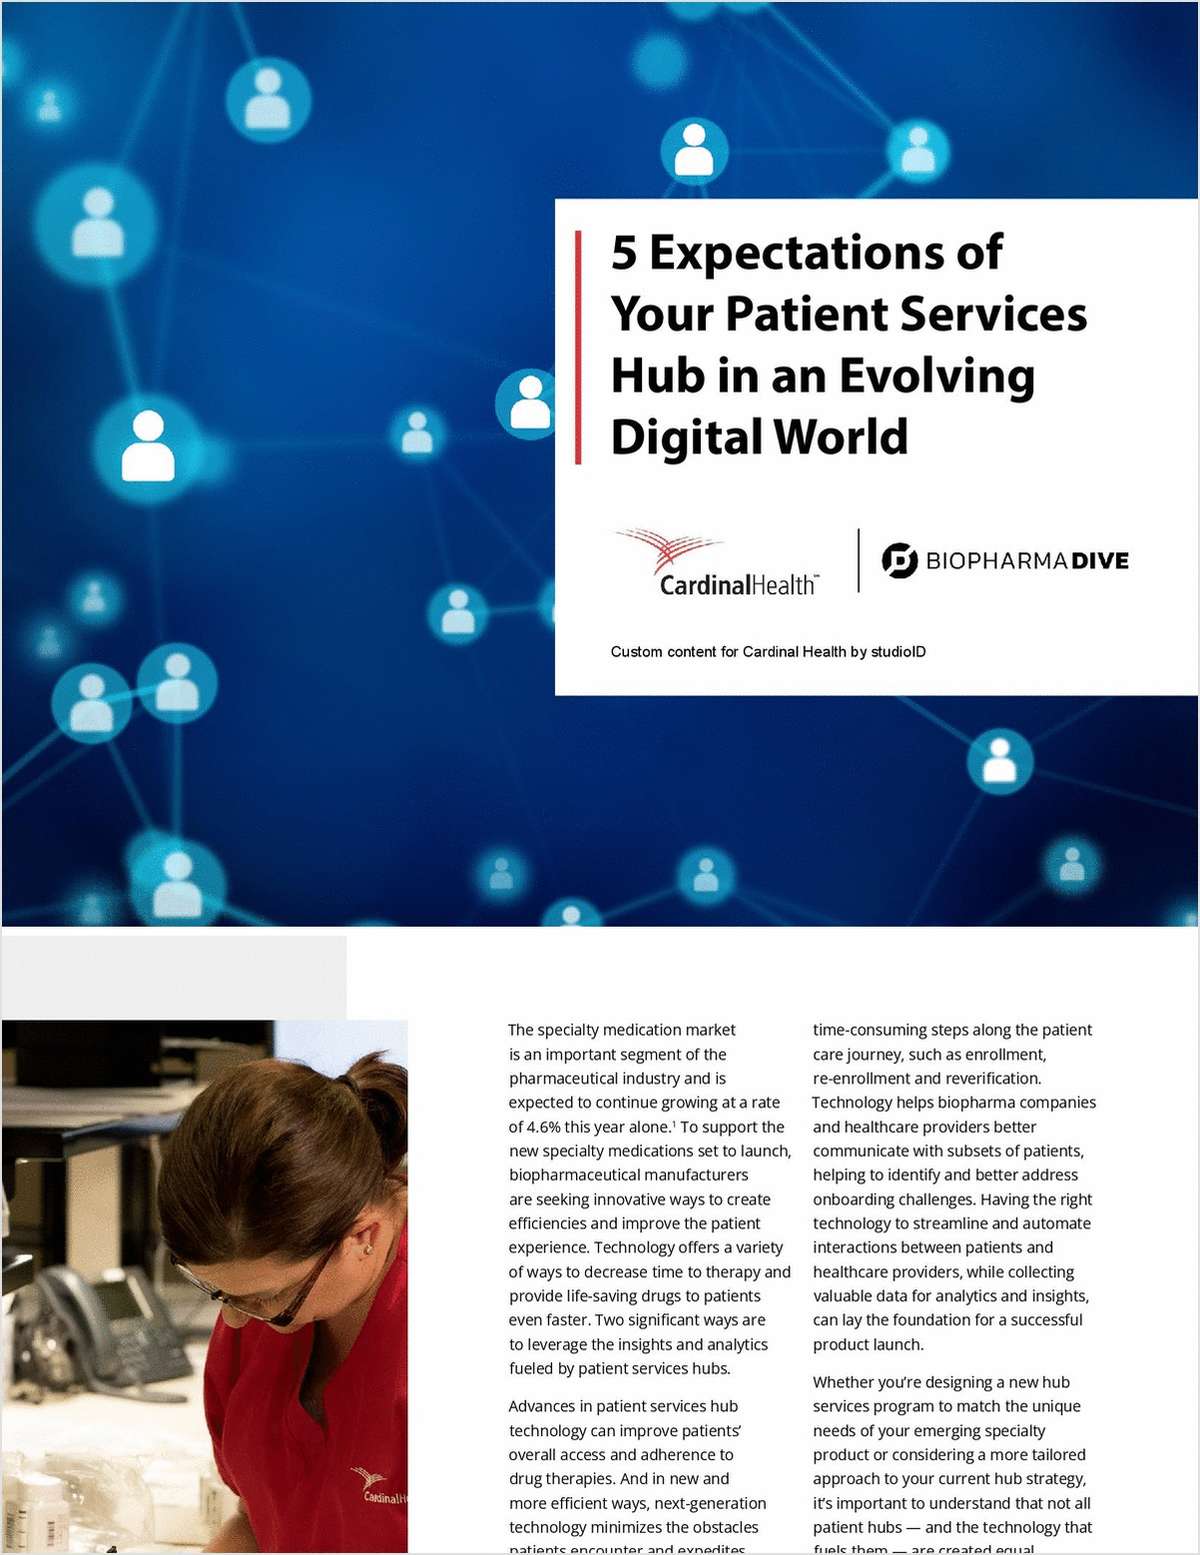 5 Expectations of Your Patient Services Hub